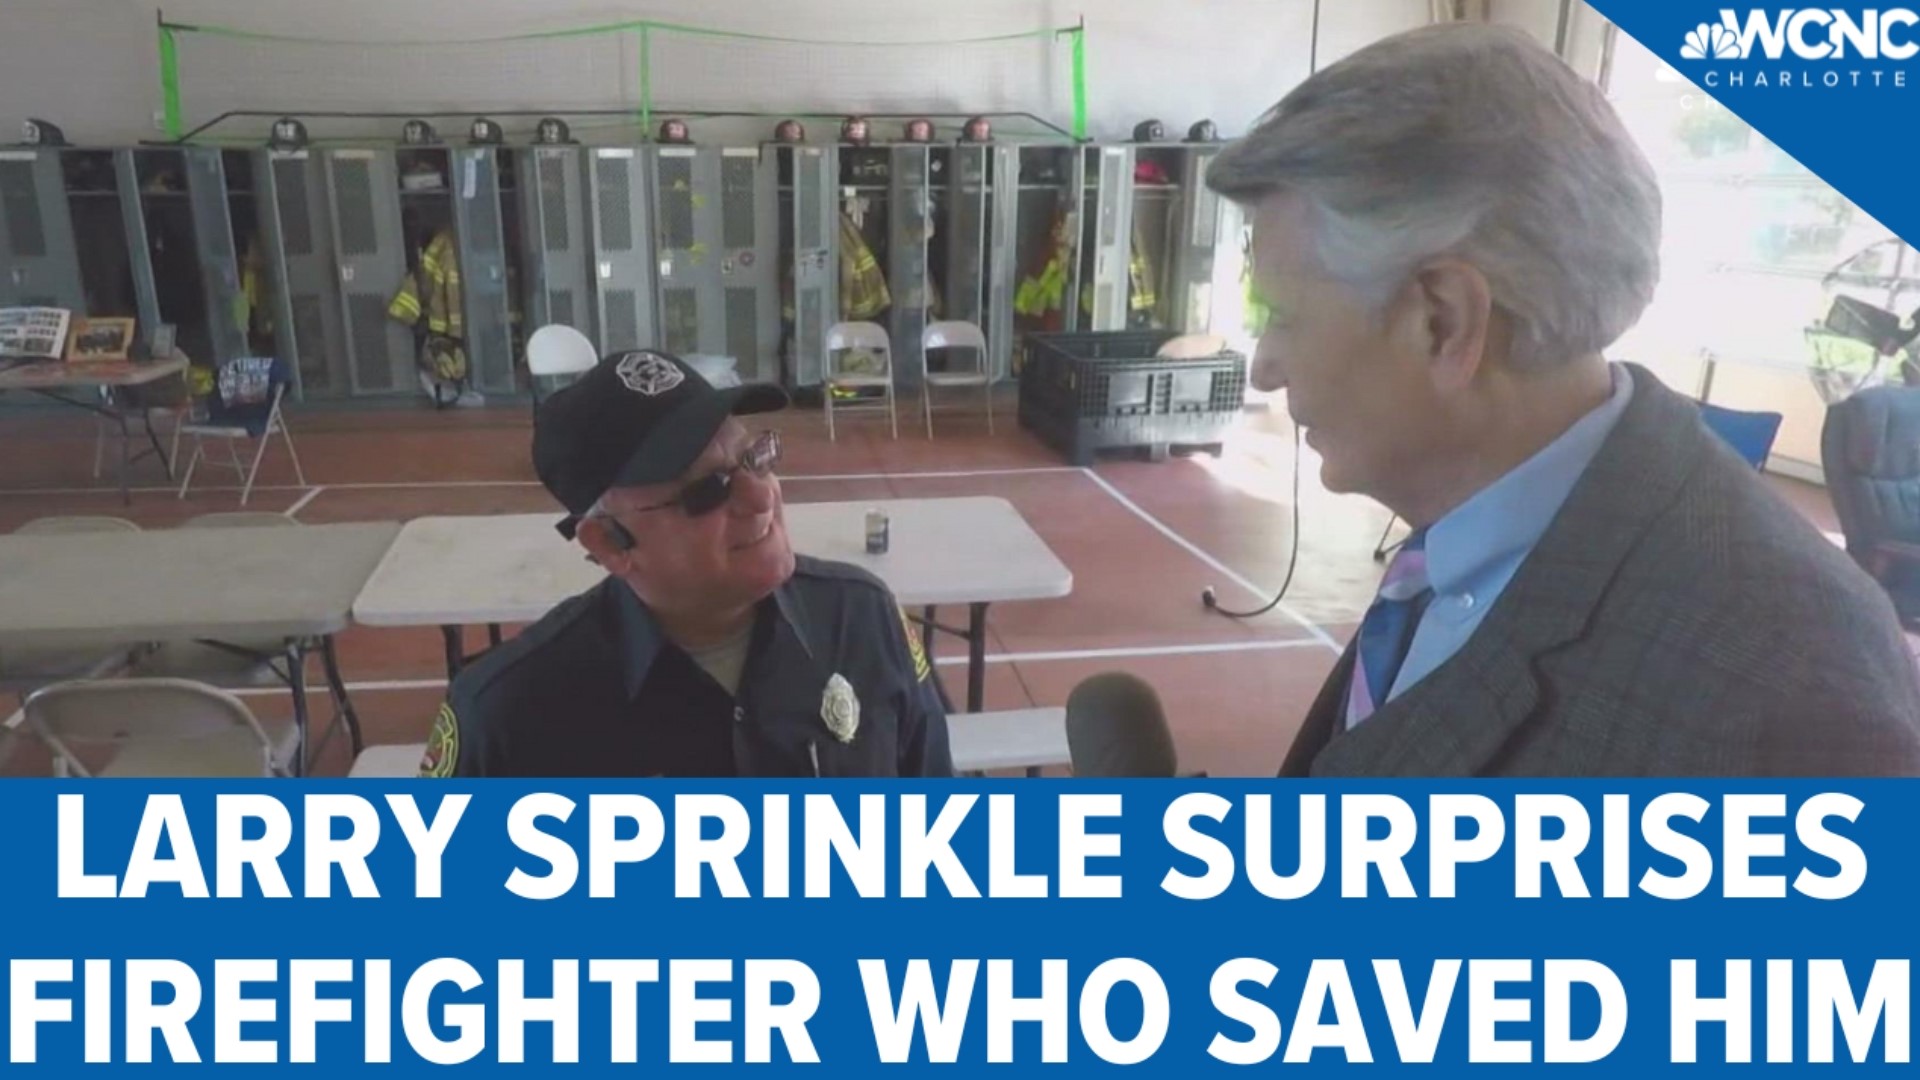 Six years after the wreck that almost took the life of WCNC Charlotte's Larry Sprinkle, he is thanking the firefighter who saved him in a big way.